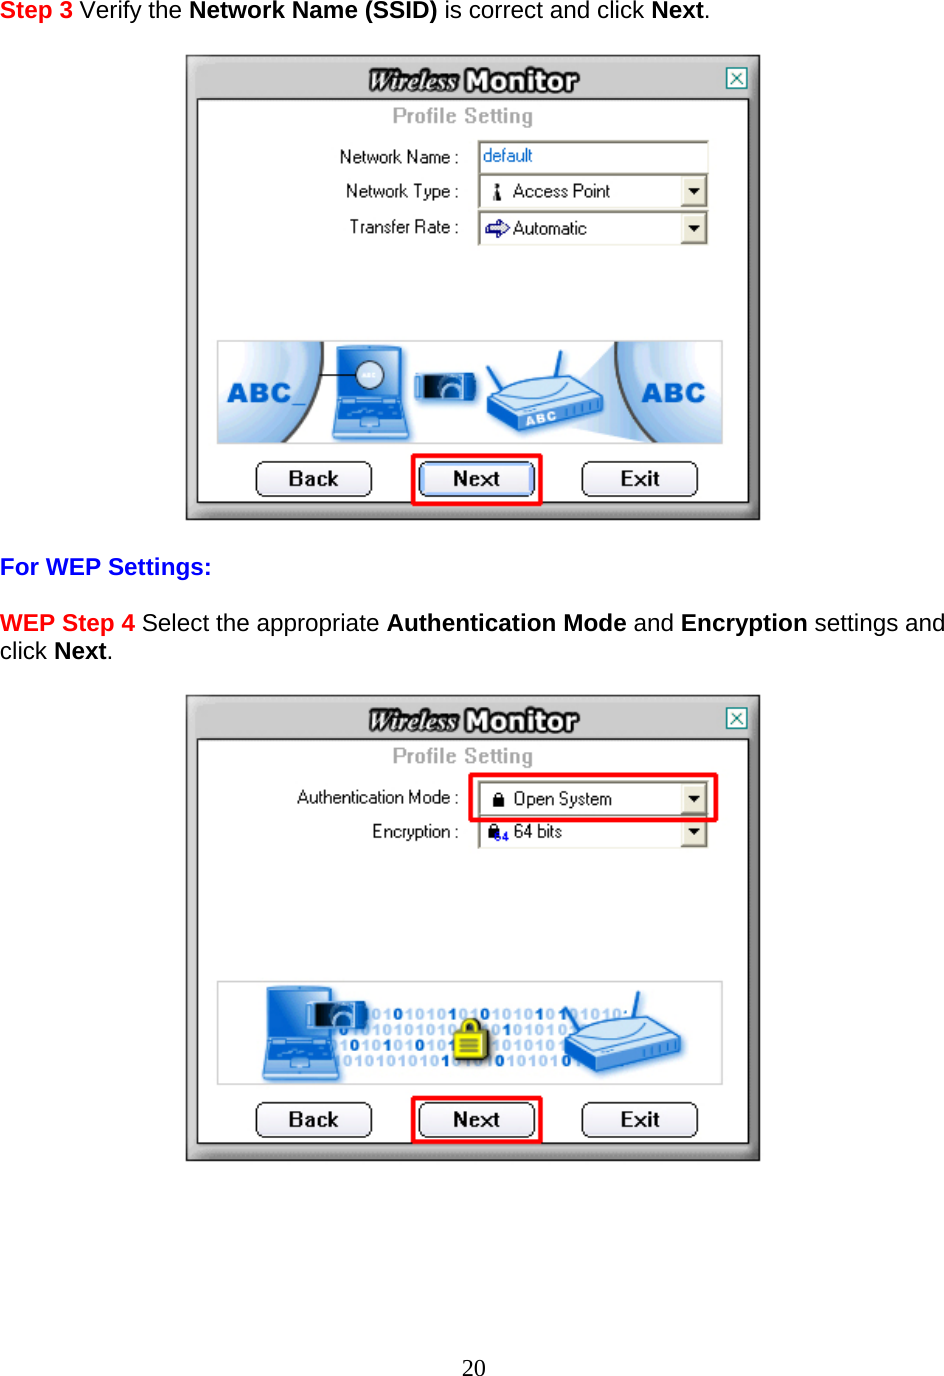 20 Step 3 Verify the Network Name (SSID) is correct and click Next.    For WEP Settings:  WEP Step 4 Select the appropriate Authentication Mode and Encryption settings and click Next.        